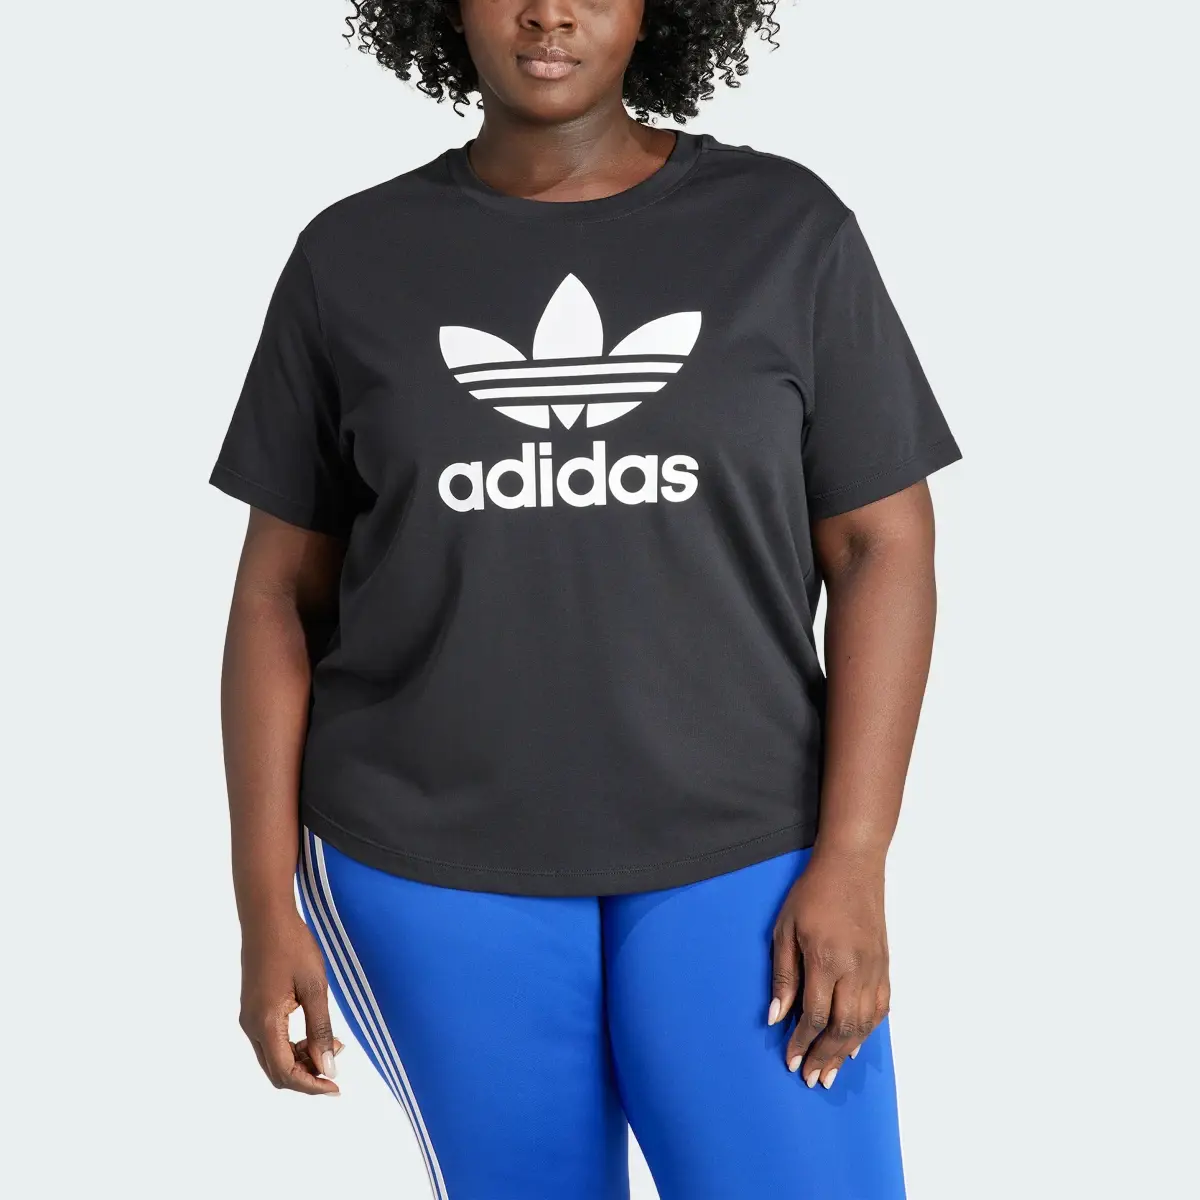 Adidas T-shirt boxy Trèfle Adicolor (Grandes tailles). 1